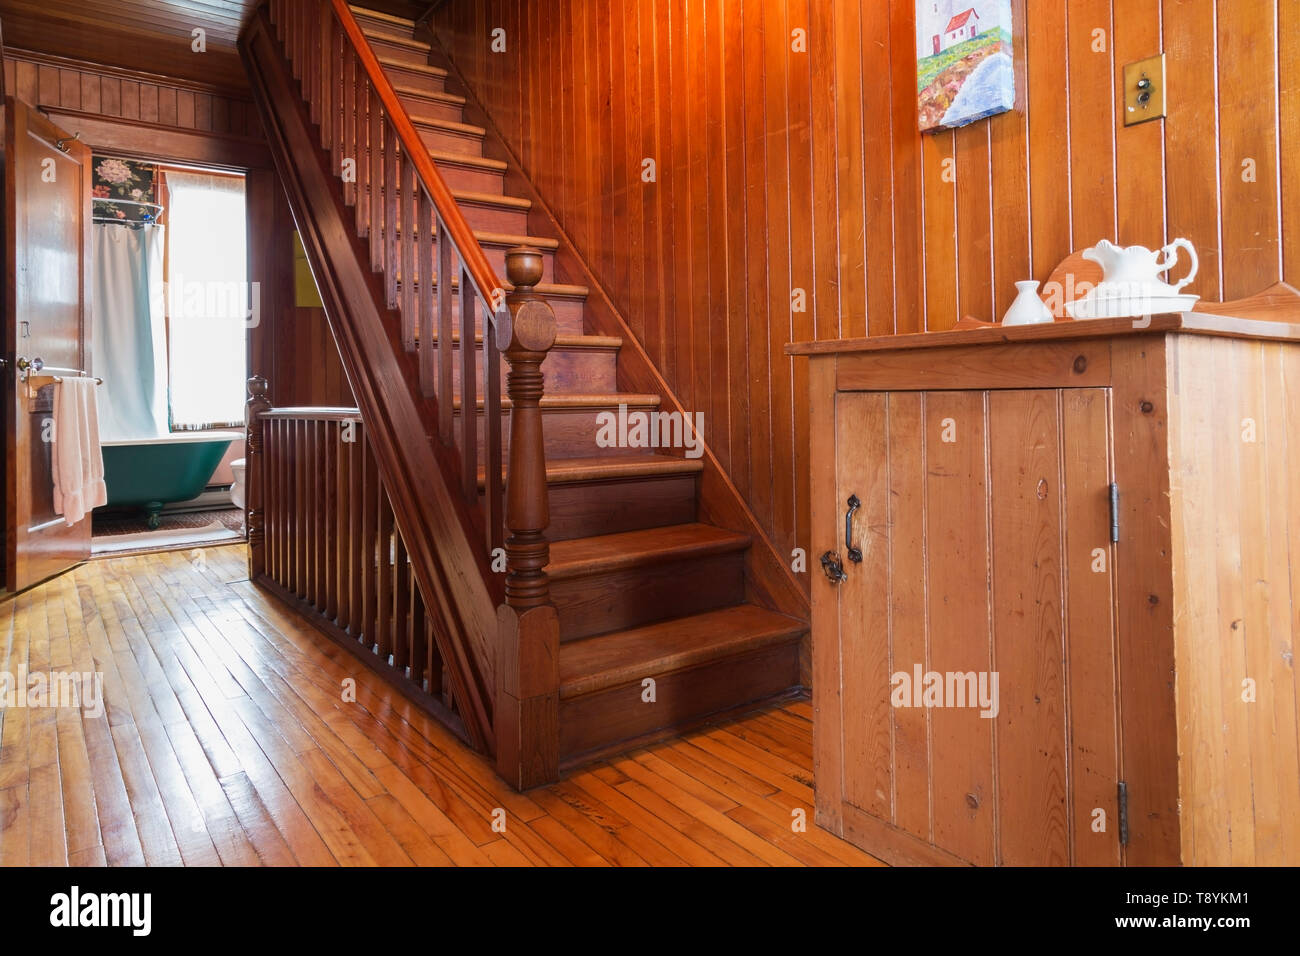 Washstand And Wooden Staircase Leading To Attic And Opened Door Of